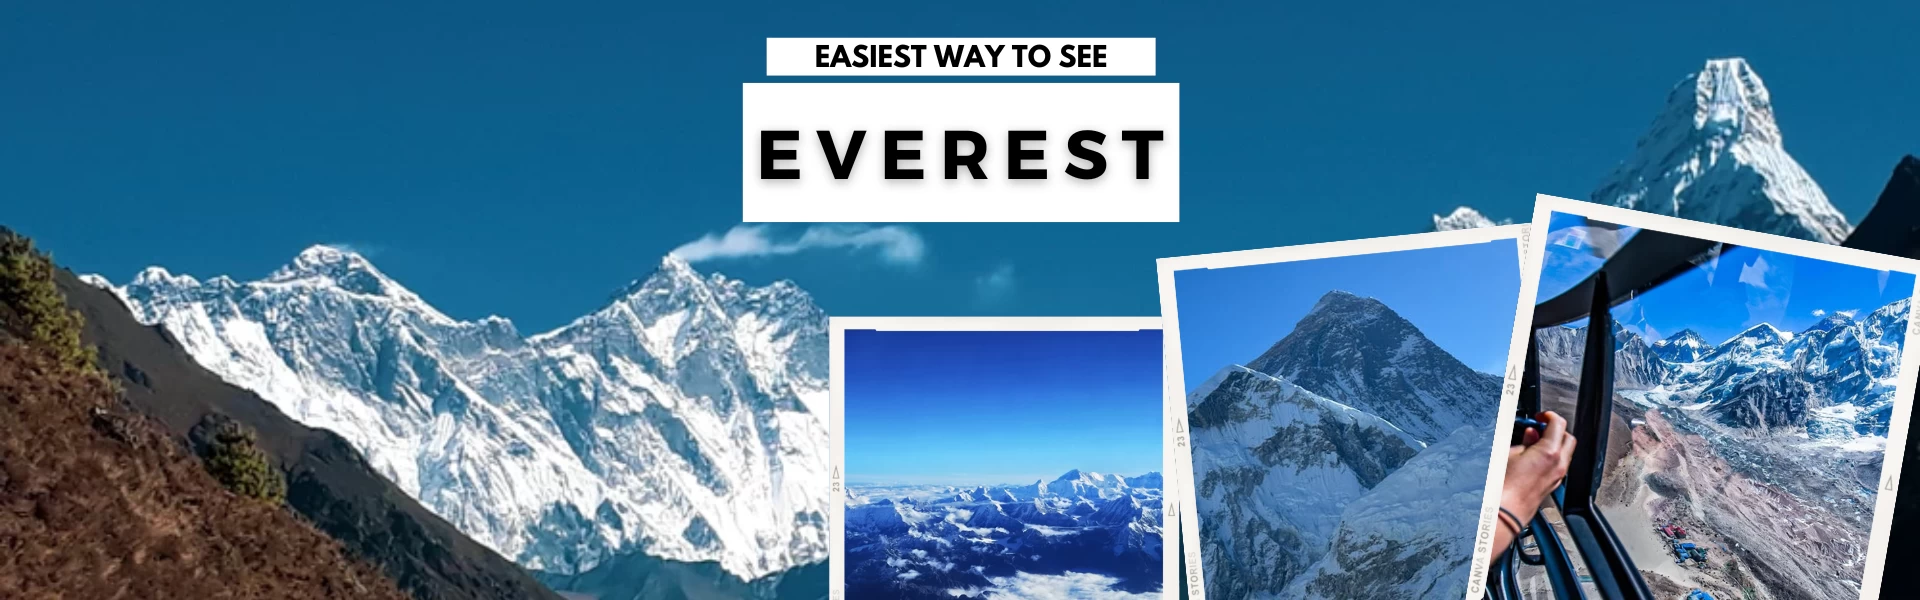 easiest-way-to-see-everest